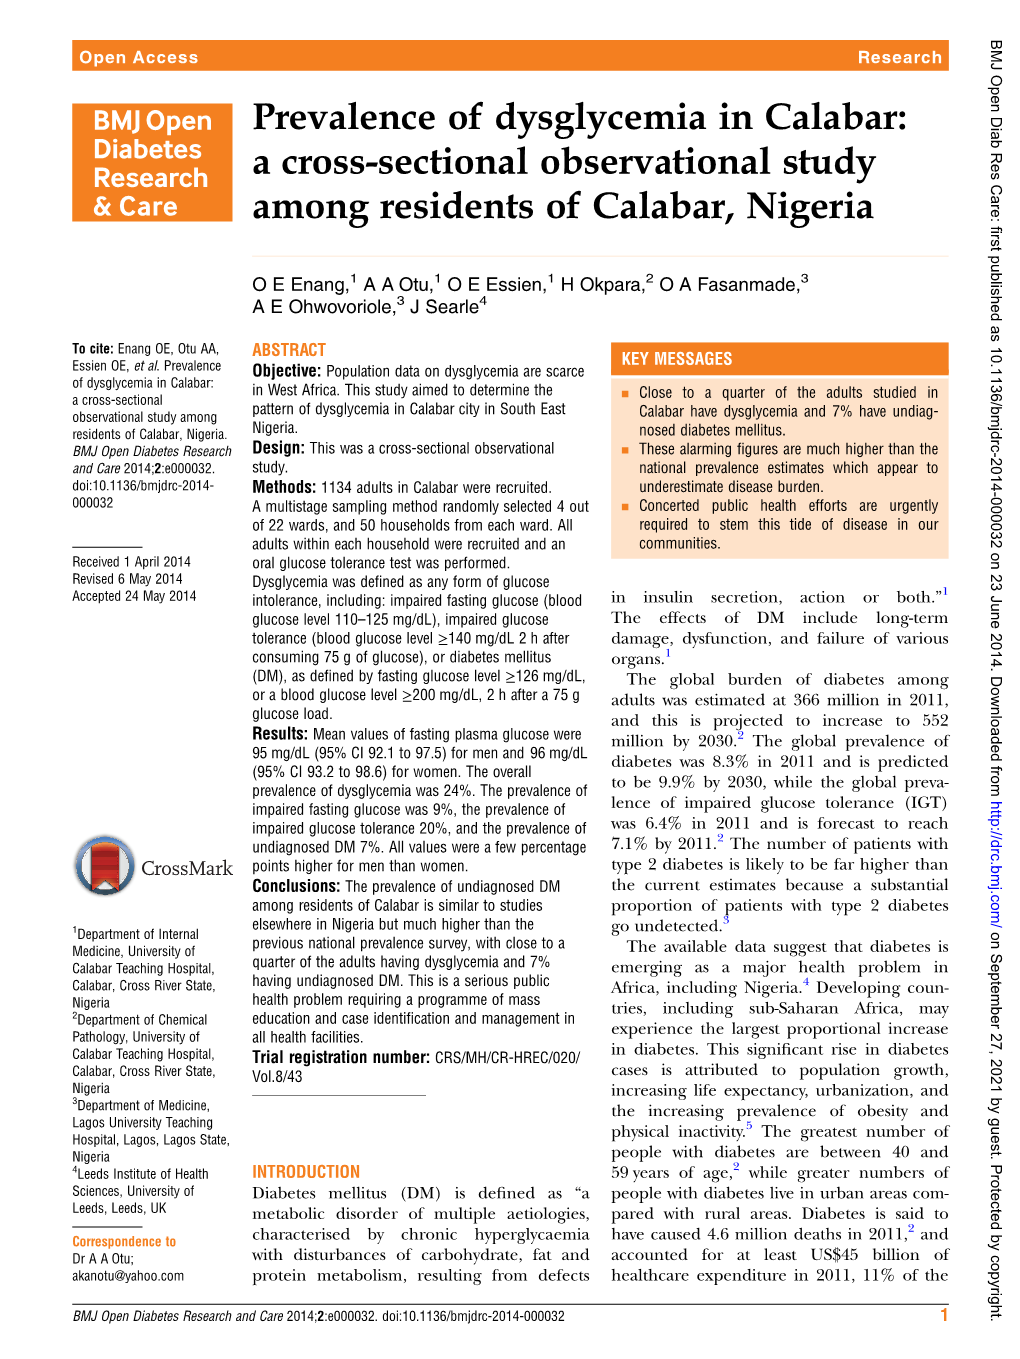 Prevalence of Dysglycemia in Calabar: a Cross-Sectional Observational Study Among Residents of Calabar, Nigeria